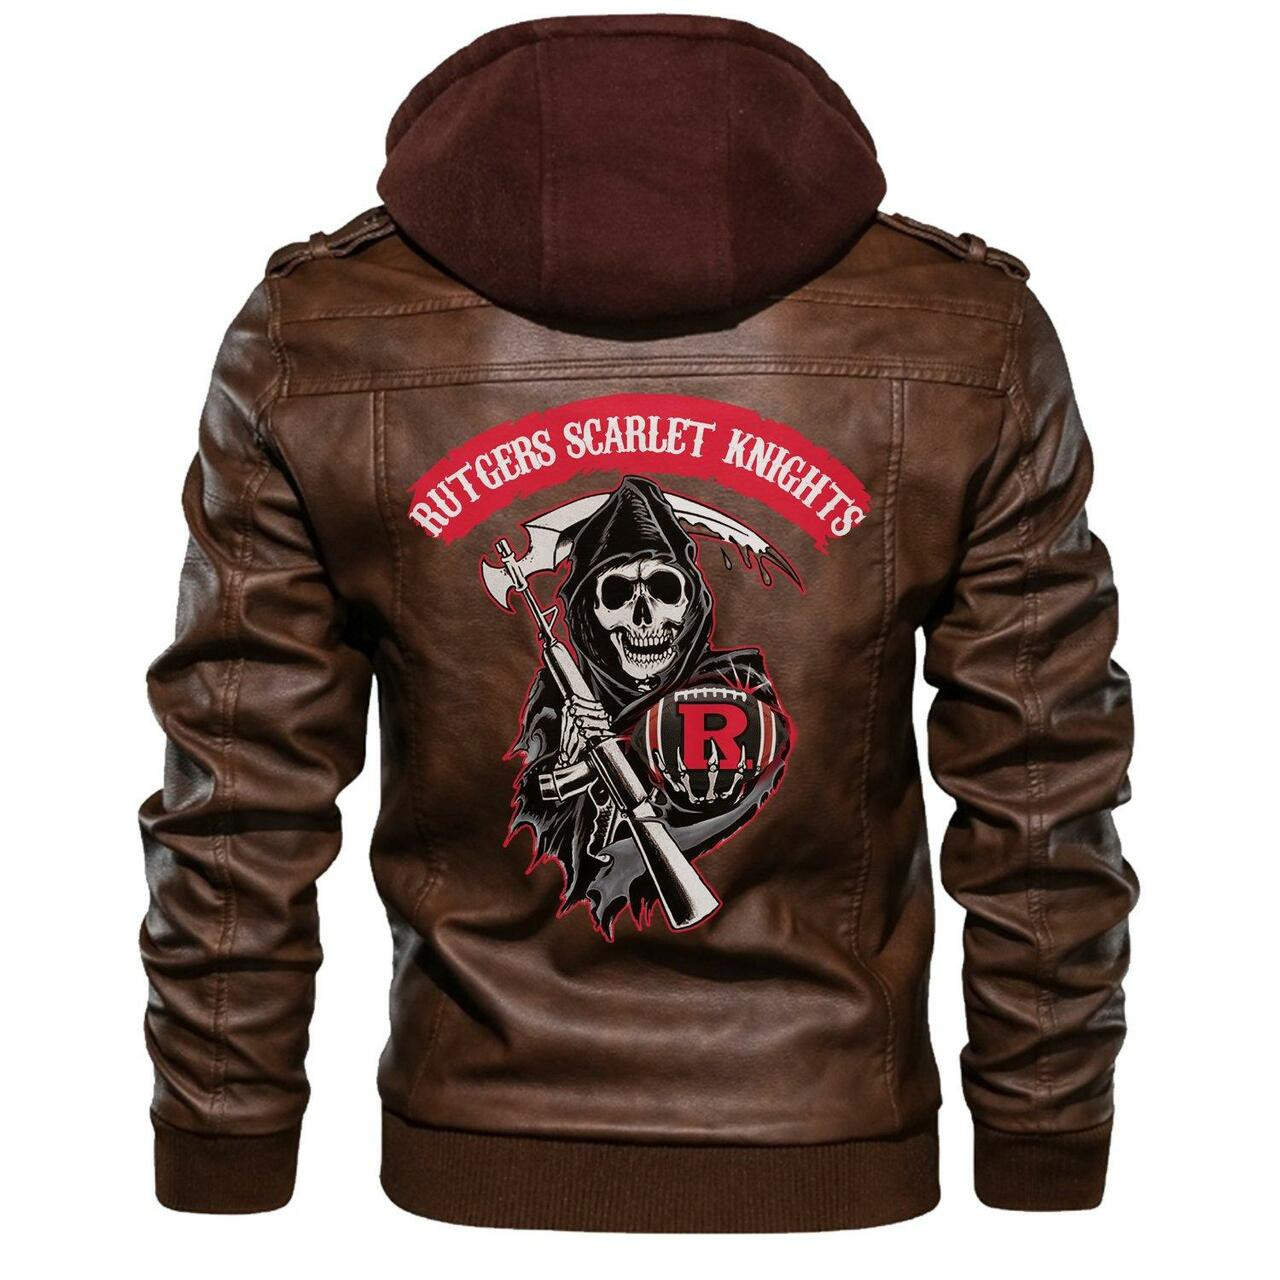 Don't wait another minute, Get Hot Leather Jacket today 69